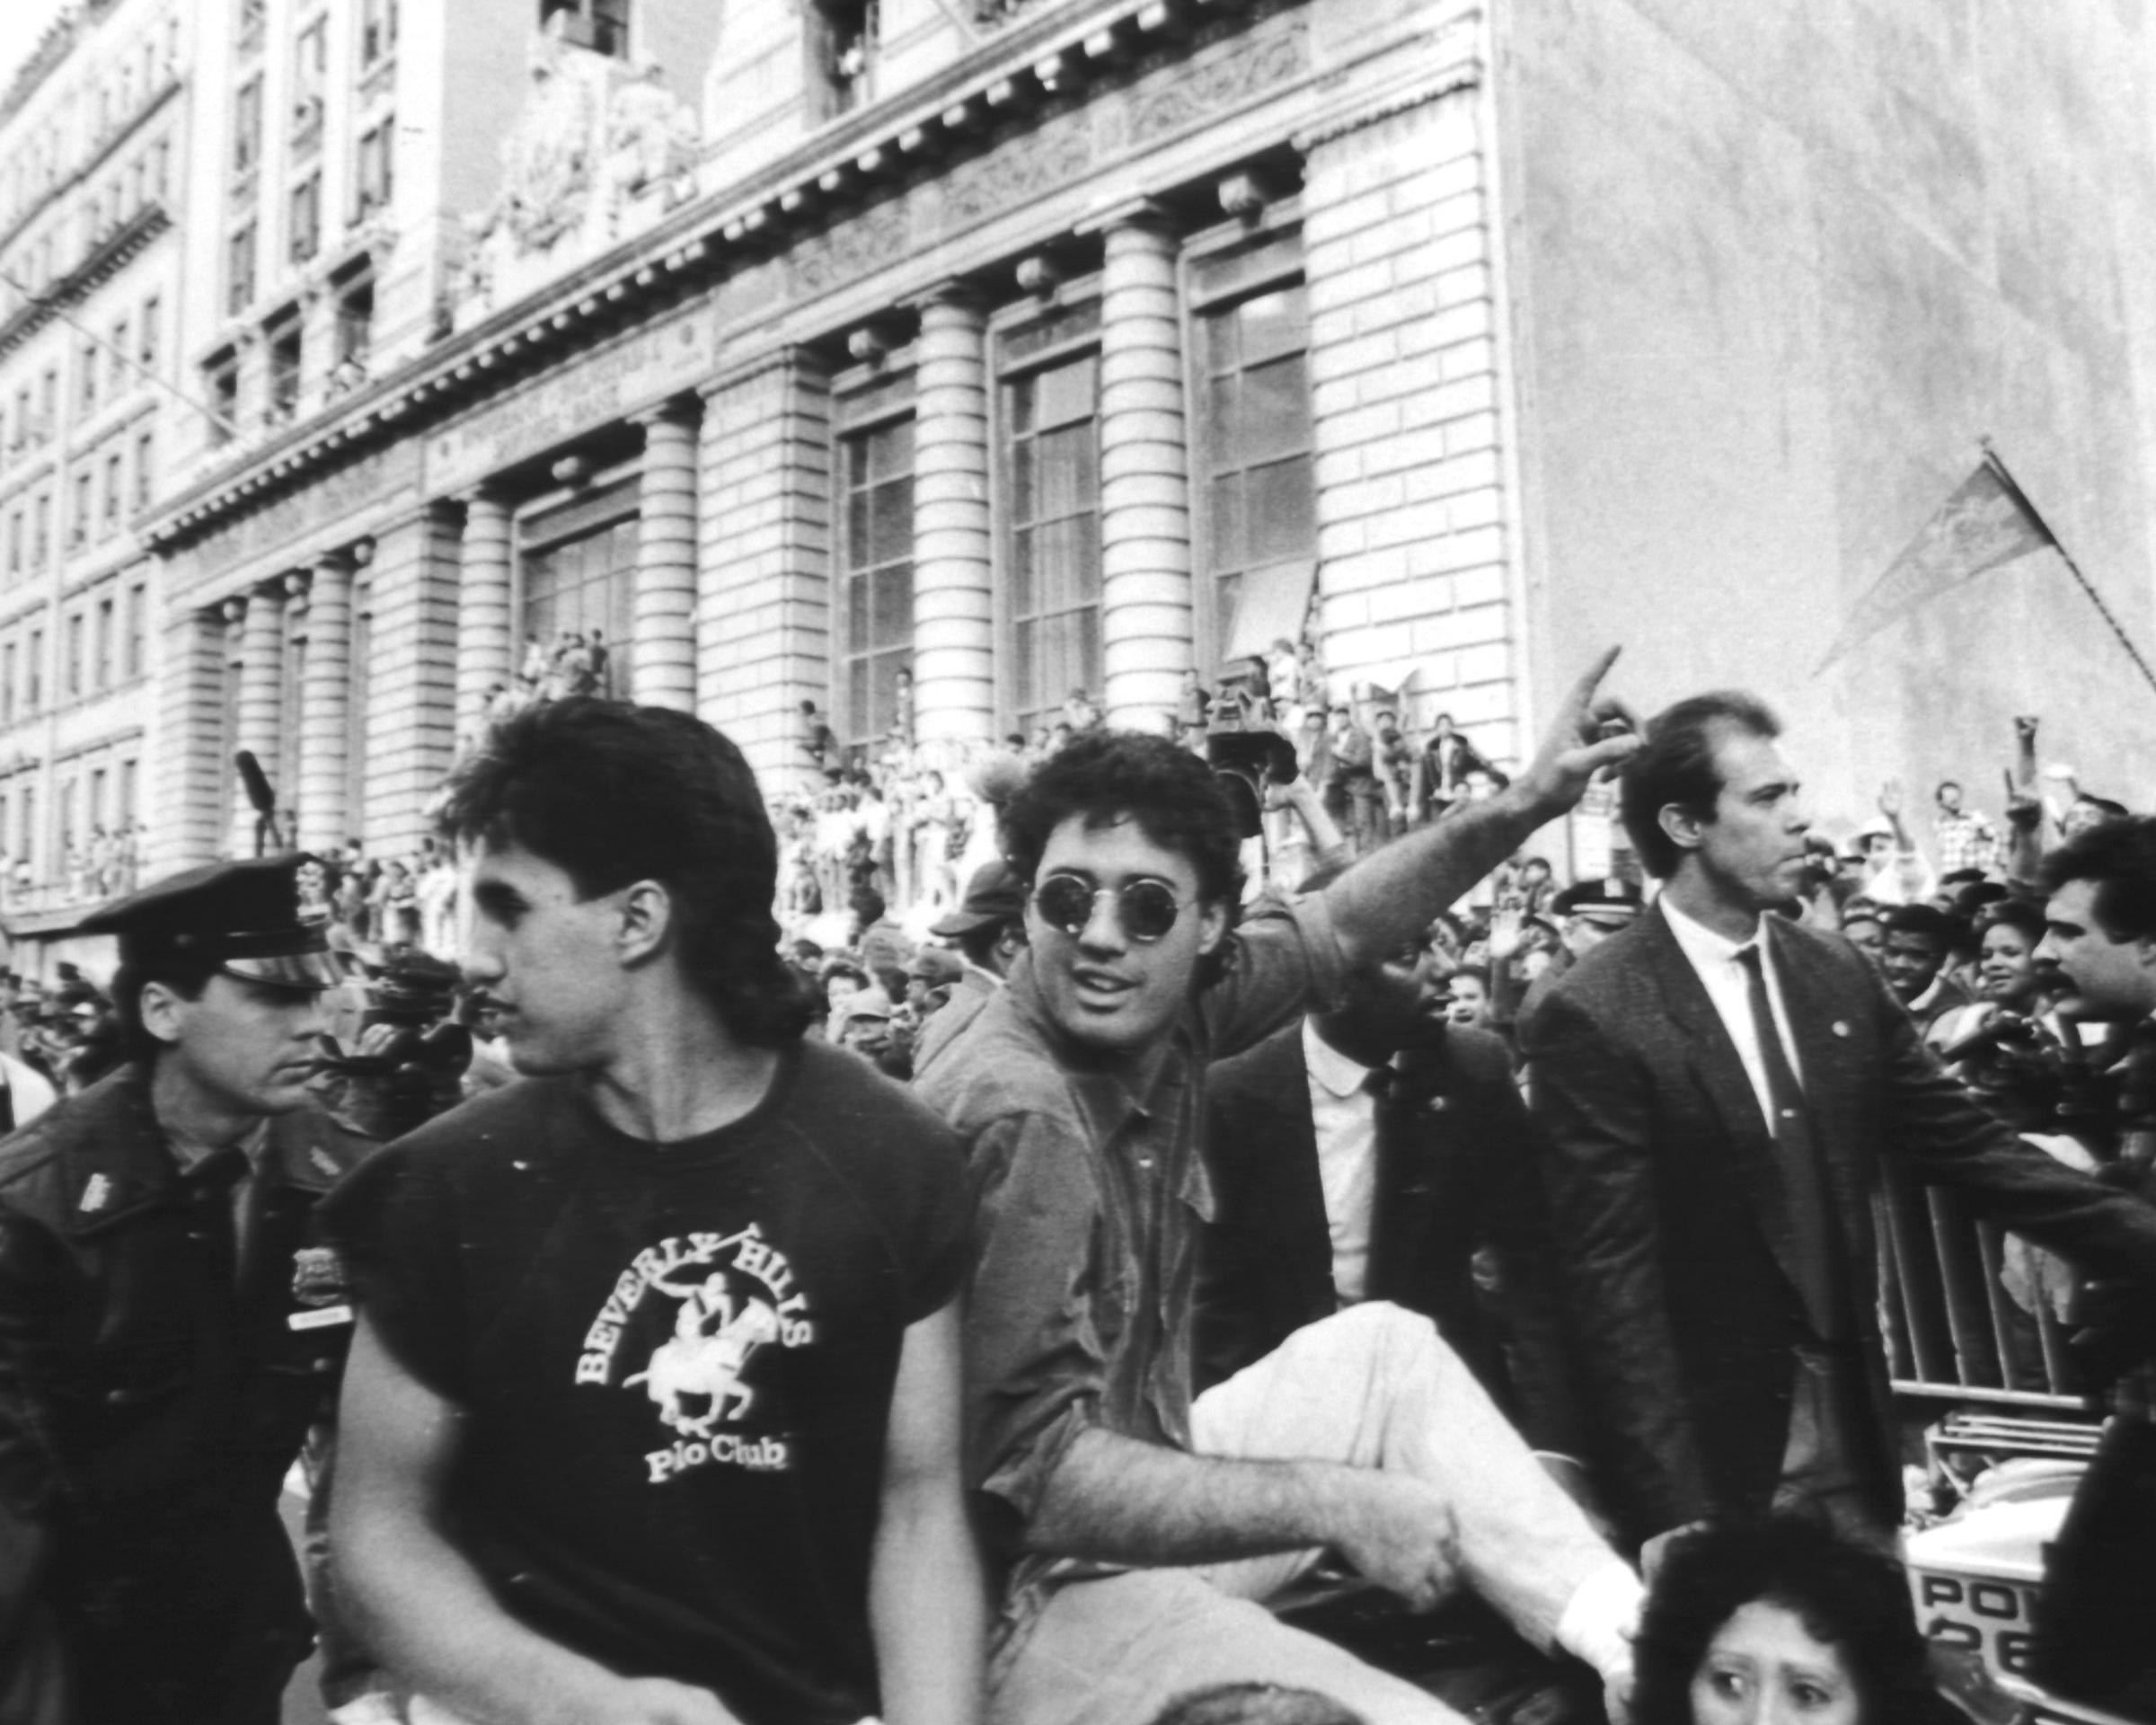 UNITED STATES - OCTOBER 28: Thousands greet pitcher Ron Darling at New York Mets' parade as he arrives at City Hall.